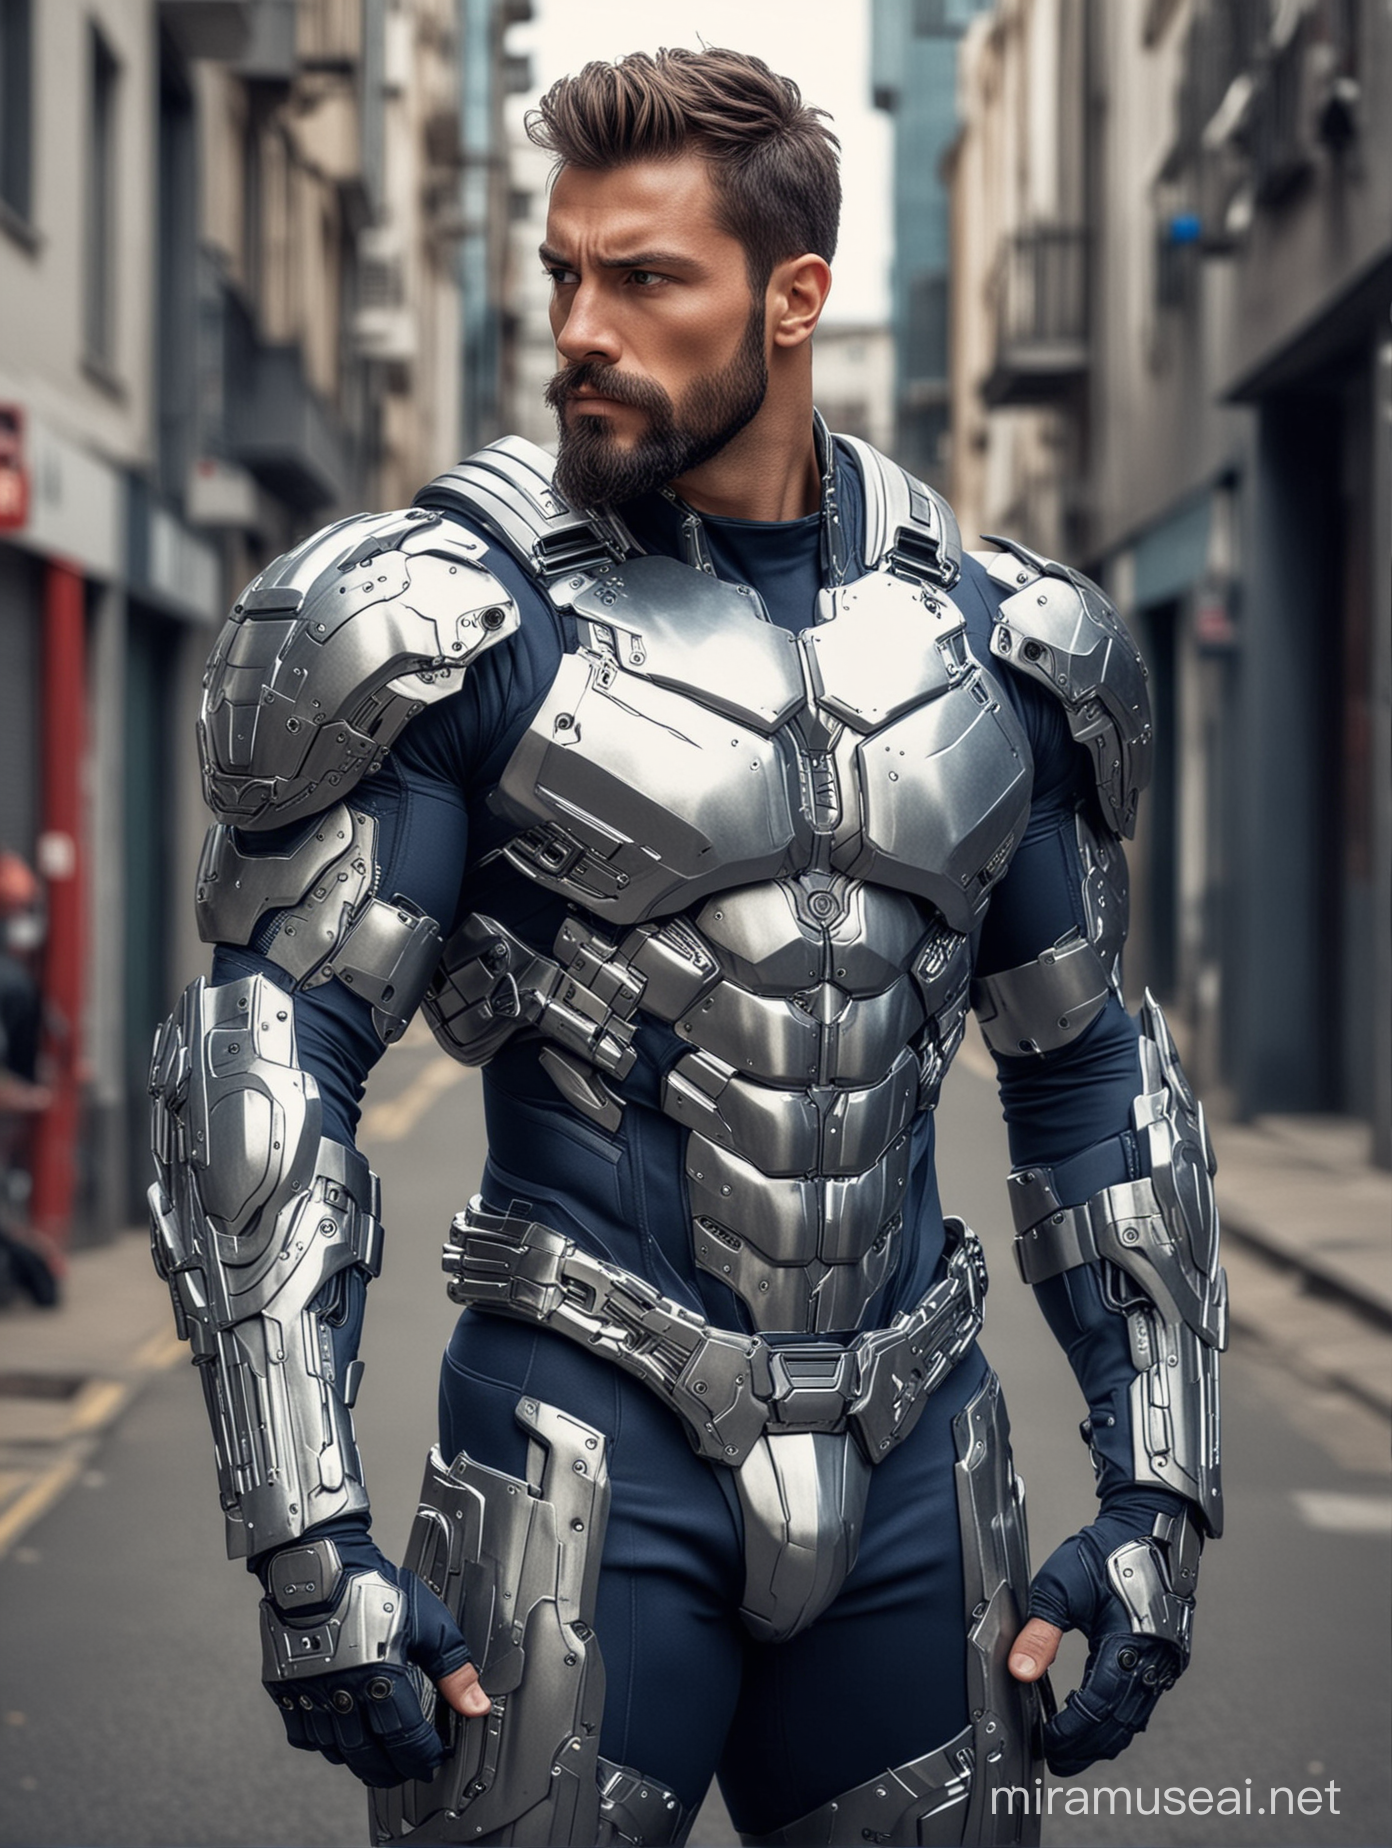 Tall and handsome bodybuilder men with beautiful hairstyle and beard with attractive eyes and Big wide shoulder and chest in sci-fi High Tech navy and sliver armour suit with firearms standing on street